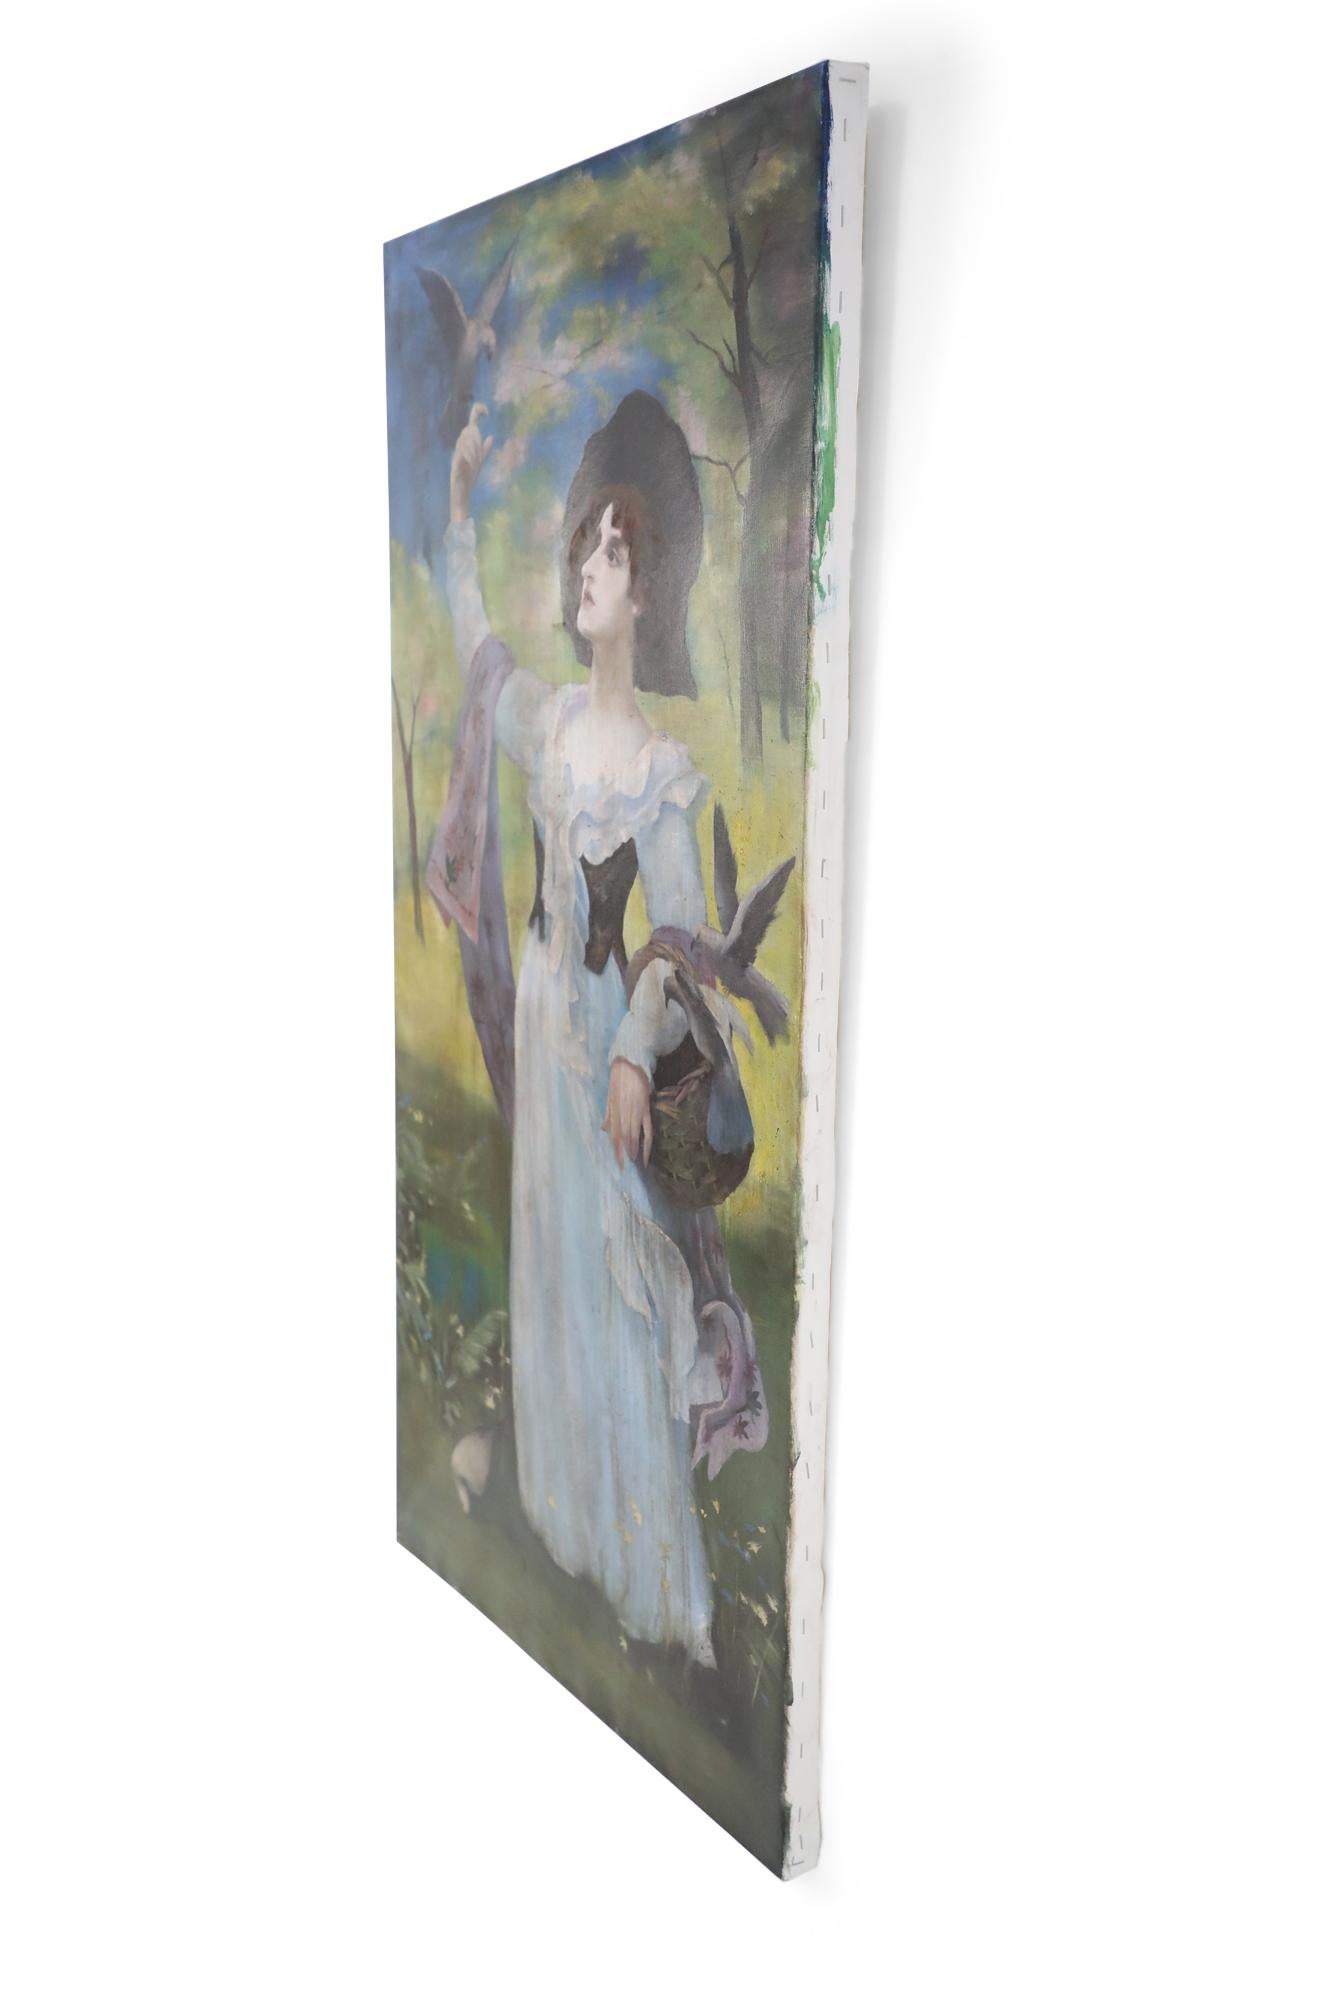 Vintage (20th Century) unframed painting of a woman wearing a white dress and mauve shawl in a natural setting, with a basket on one arm and a bird perched on her opposite, raised hand, painted on stretched canvas.
 